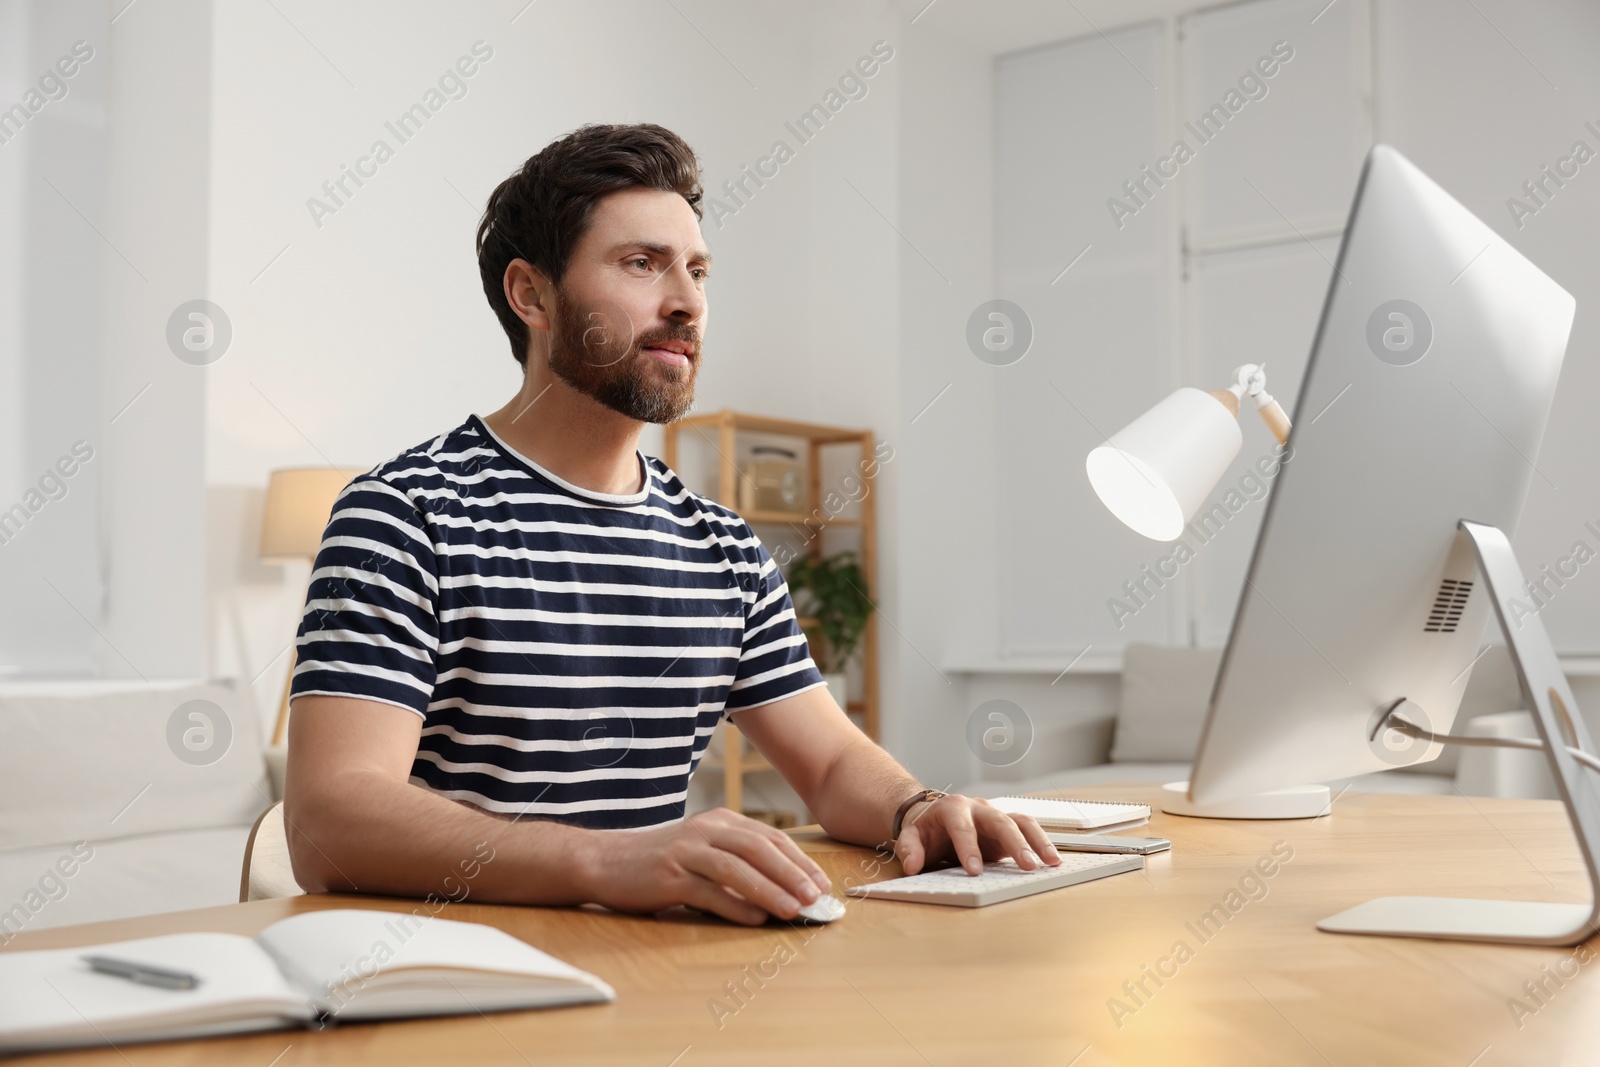 Photo of Home workplace. Man working with computer at wooden desk in room